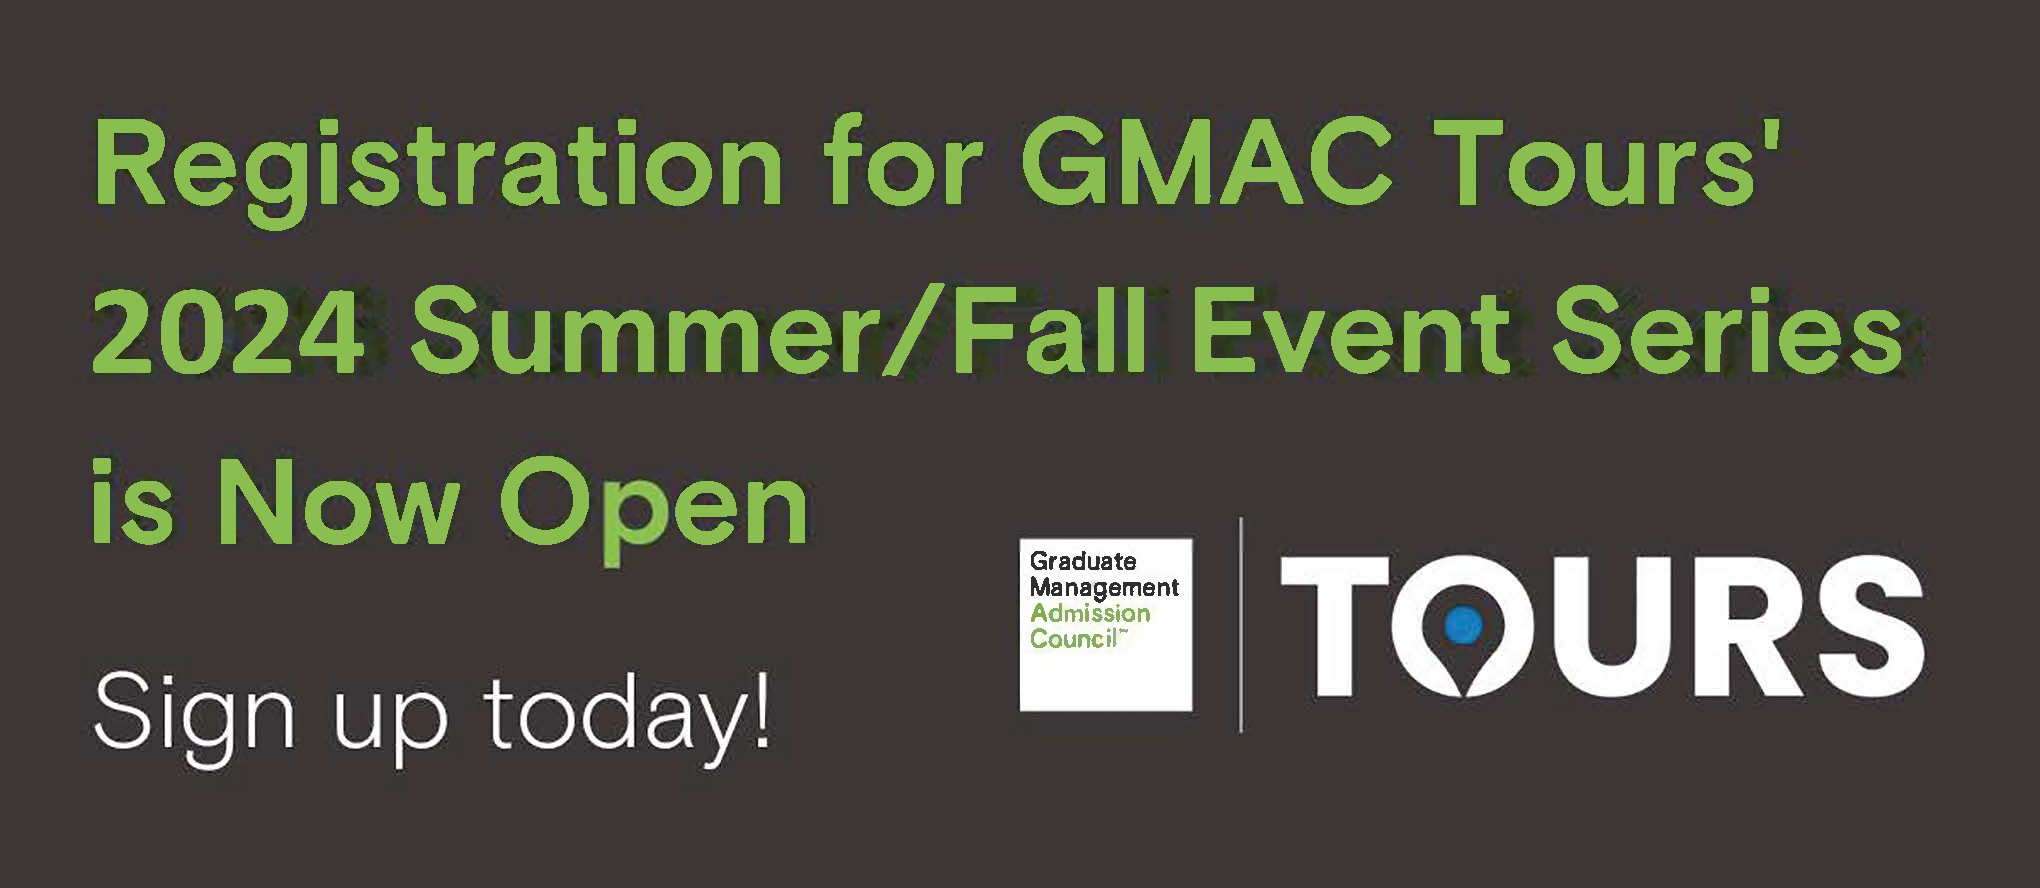 Registration for GMAC Tours 2024 Summer/Fall Event Series is Now Open